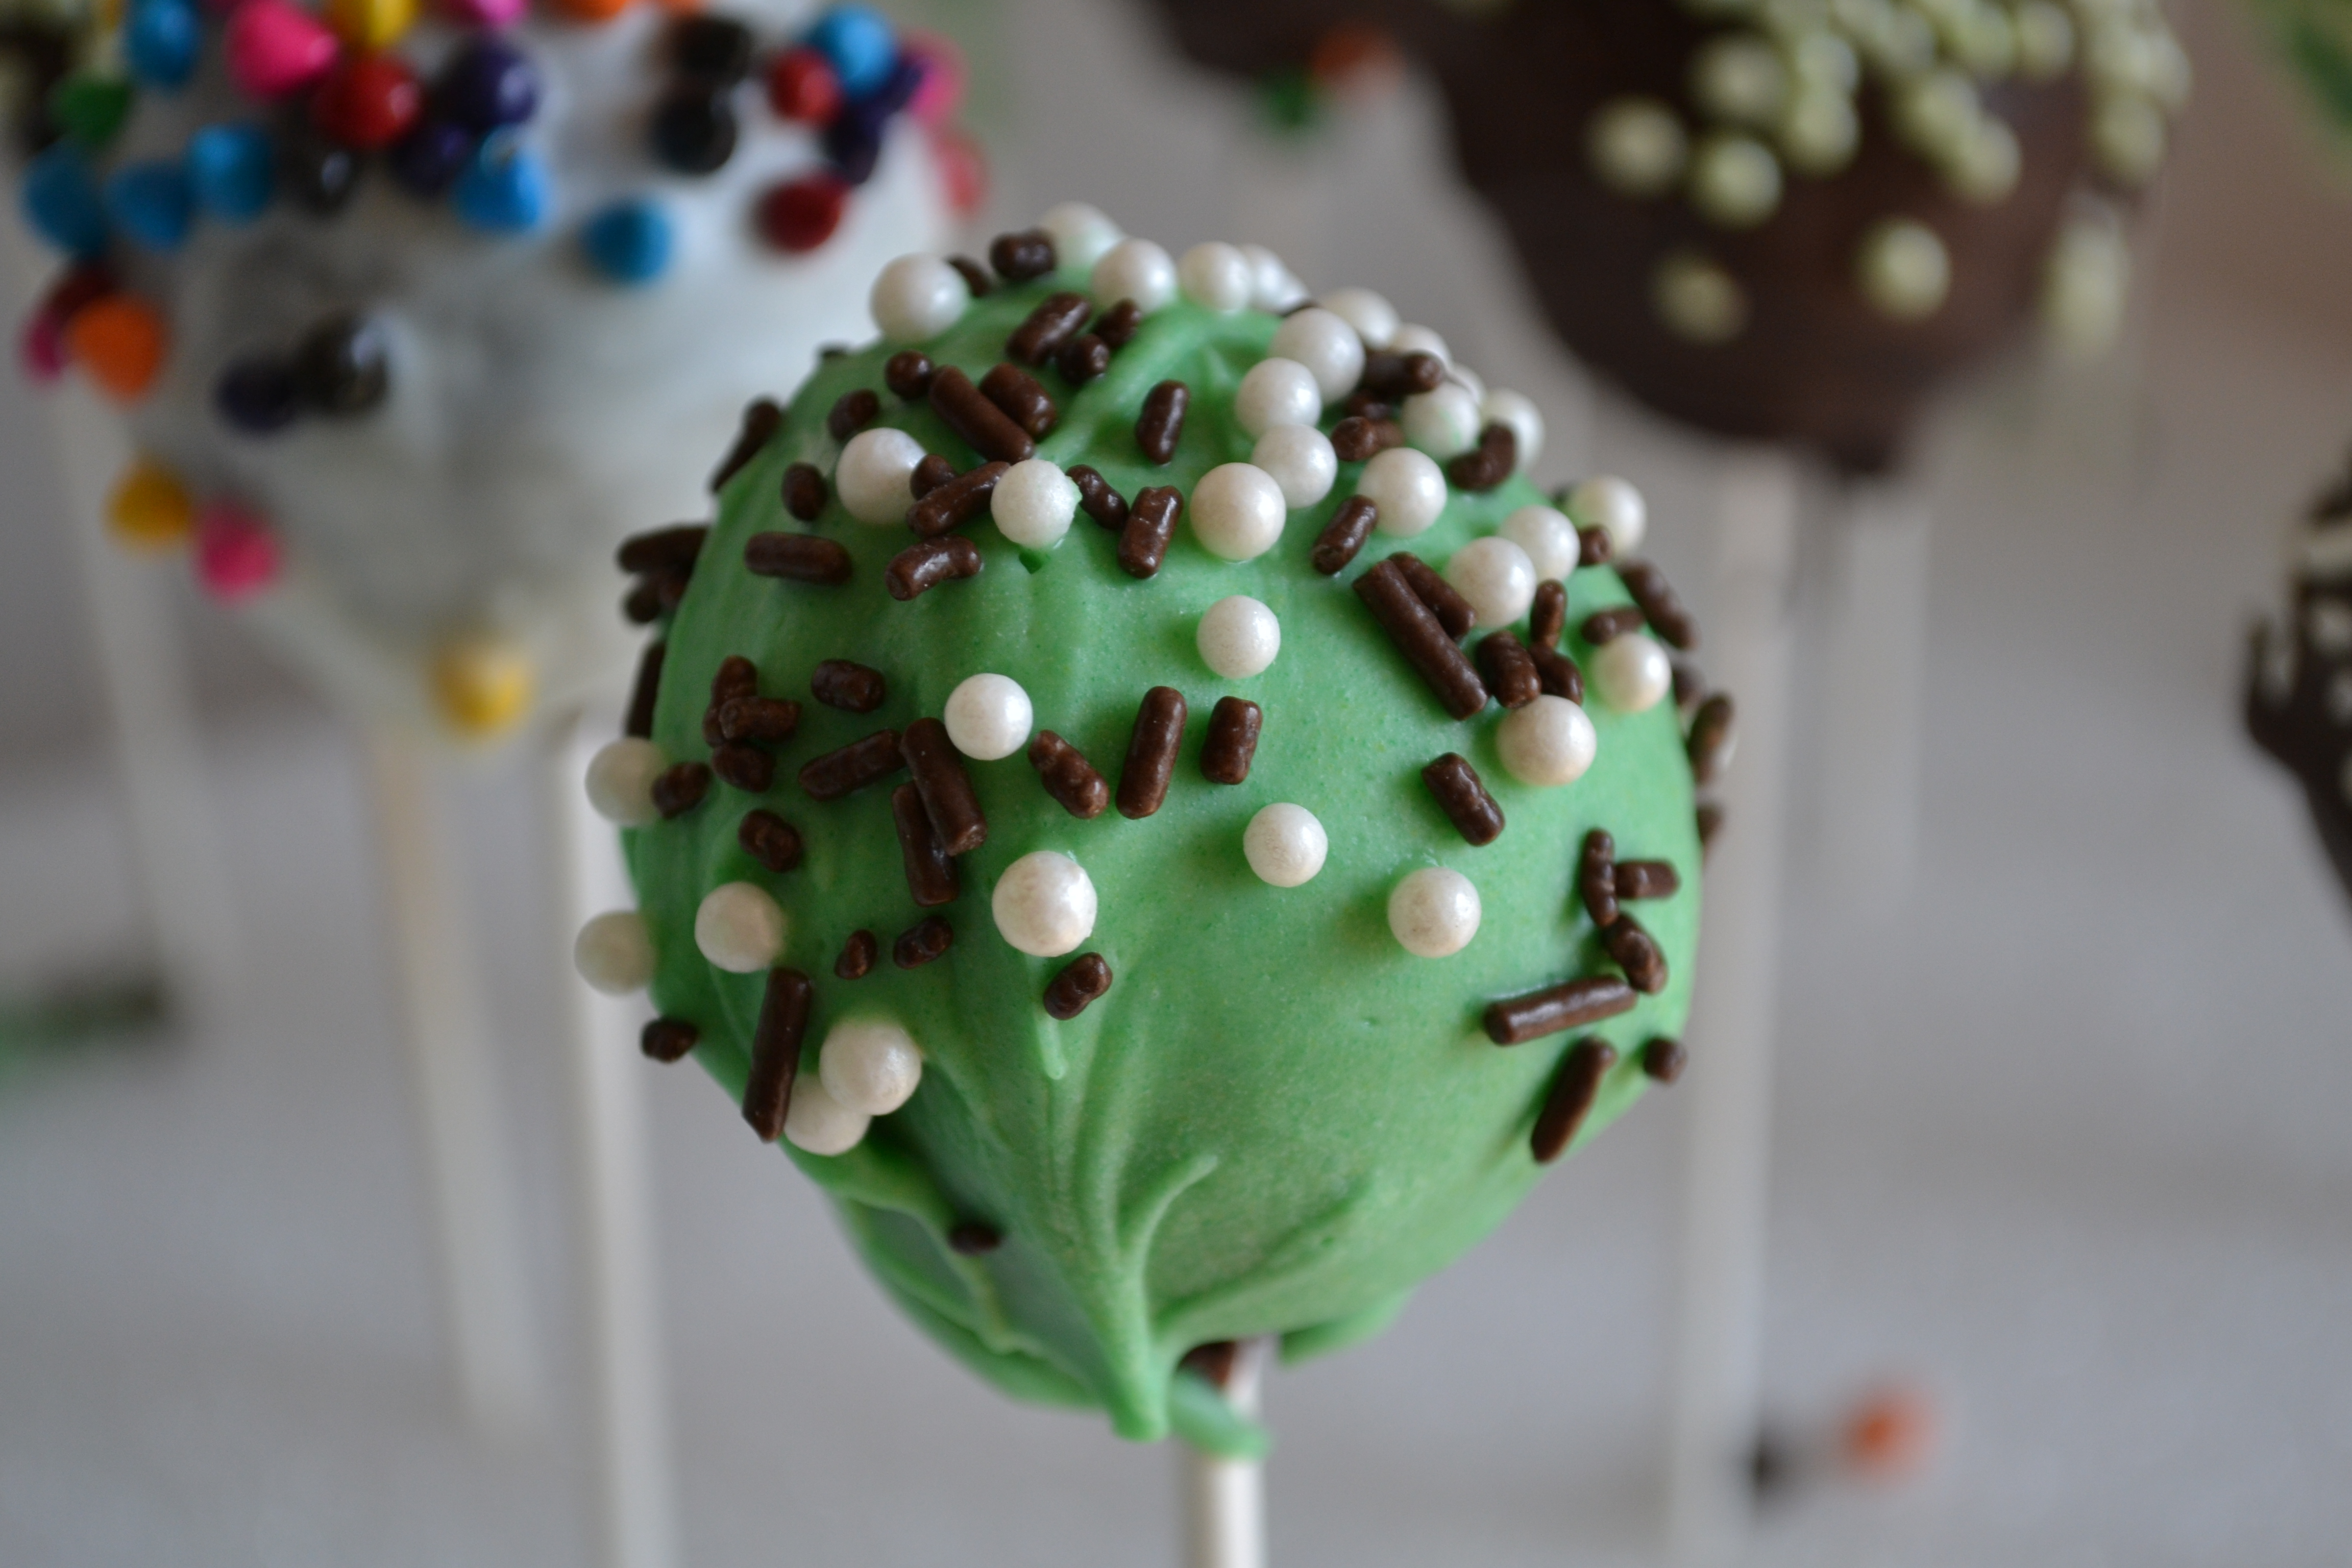 Green, brown, and white cake pops